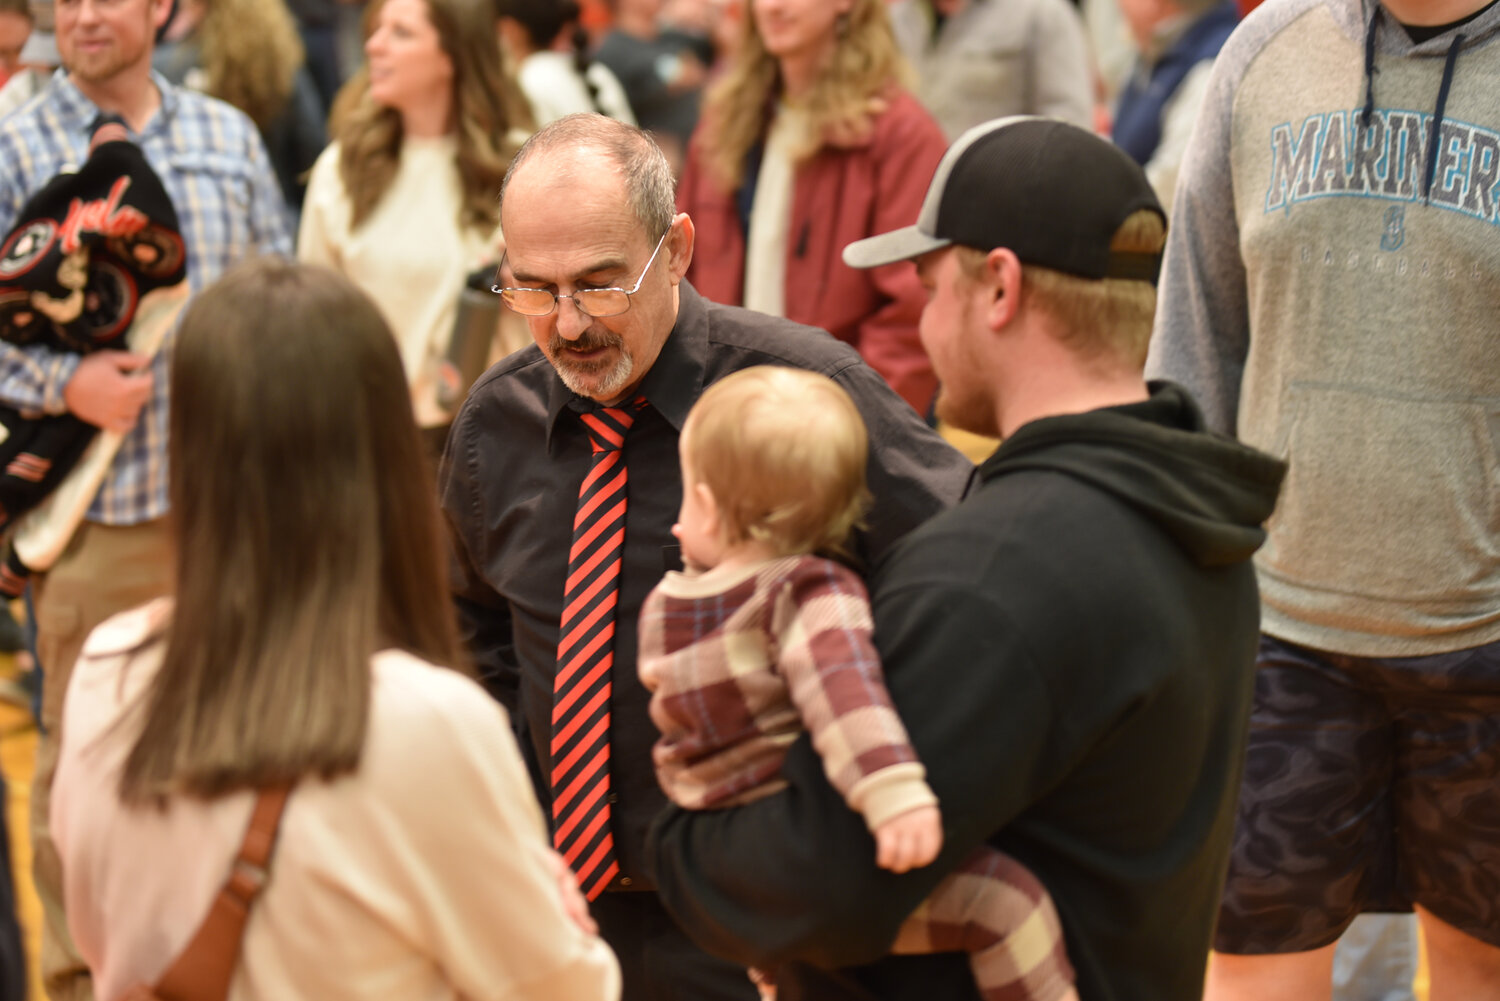 Yelm's head wrestling coach Gaylord Strand talks with former Tornados wrestler Cody Frye and his son on Jan. 23 following the coaches final home dual.